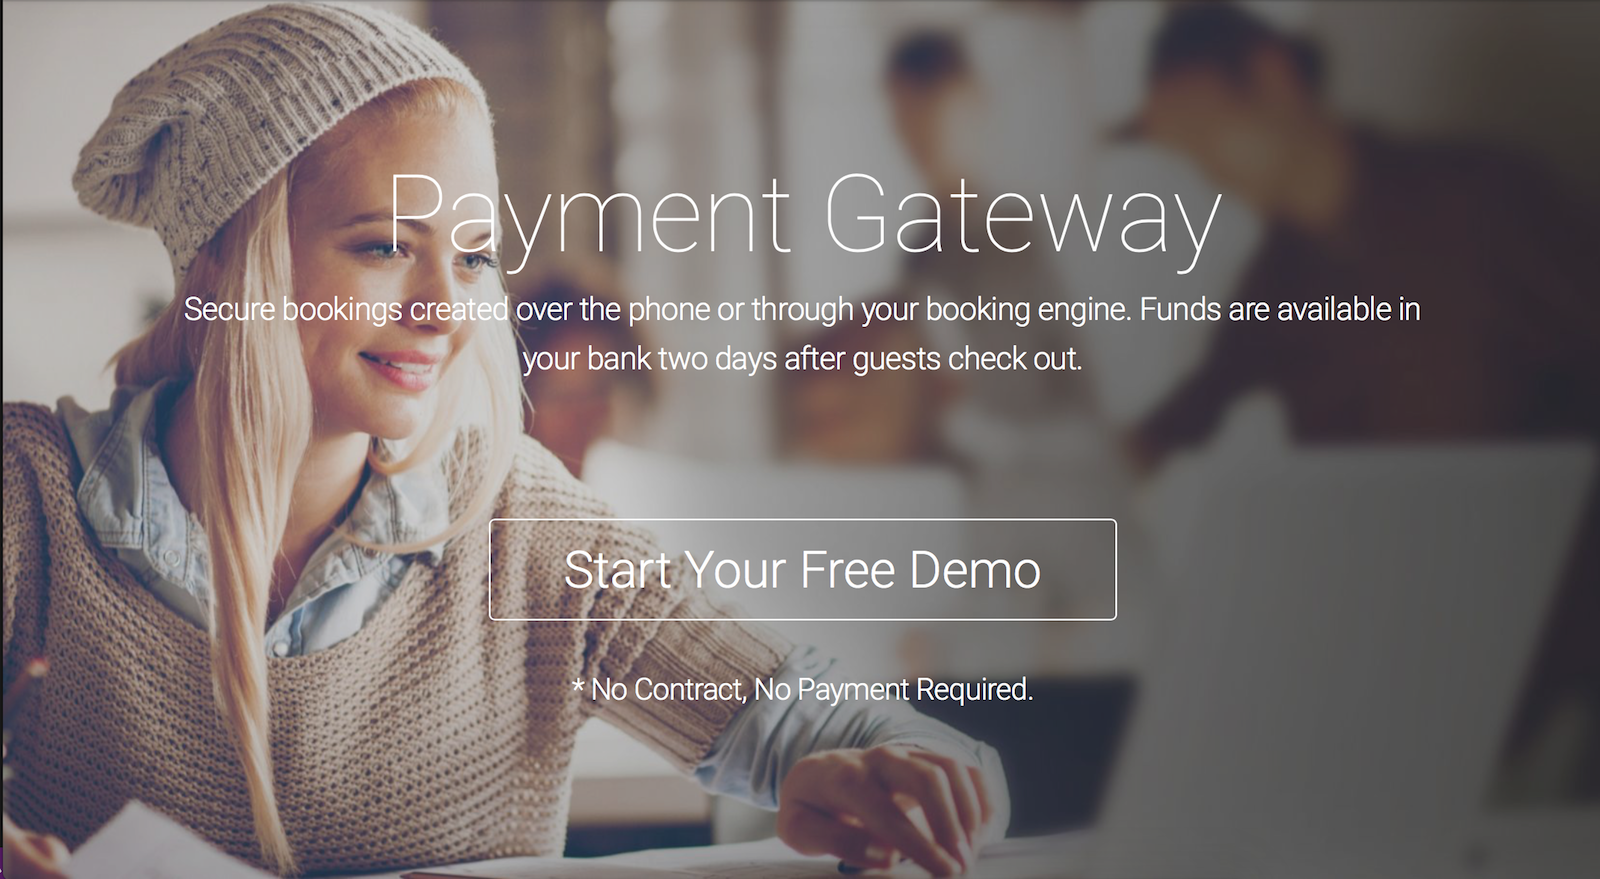 hotel Payment Gateway